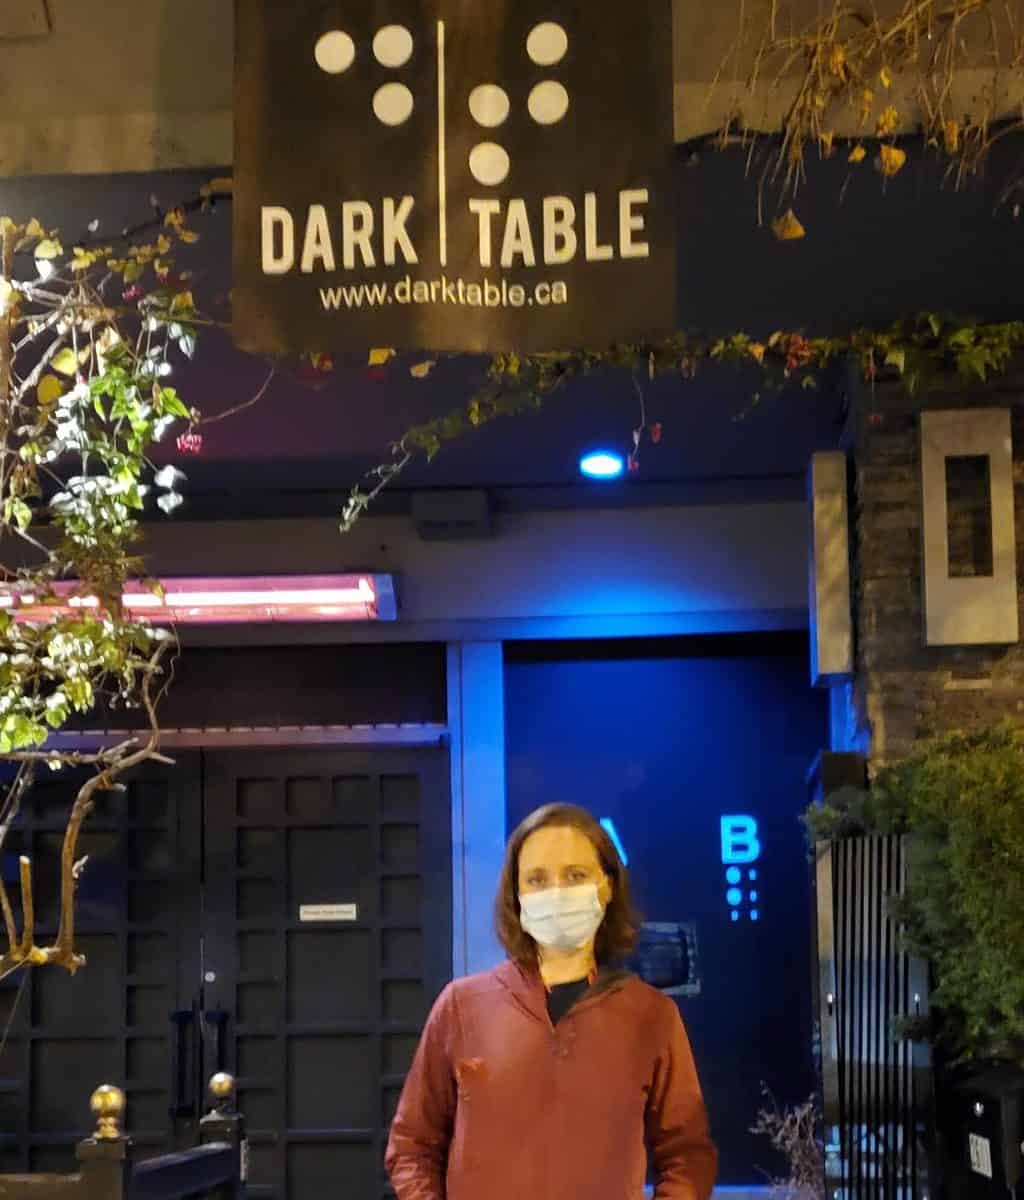 A woman poses for a photo outside a restaurant 